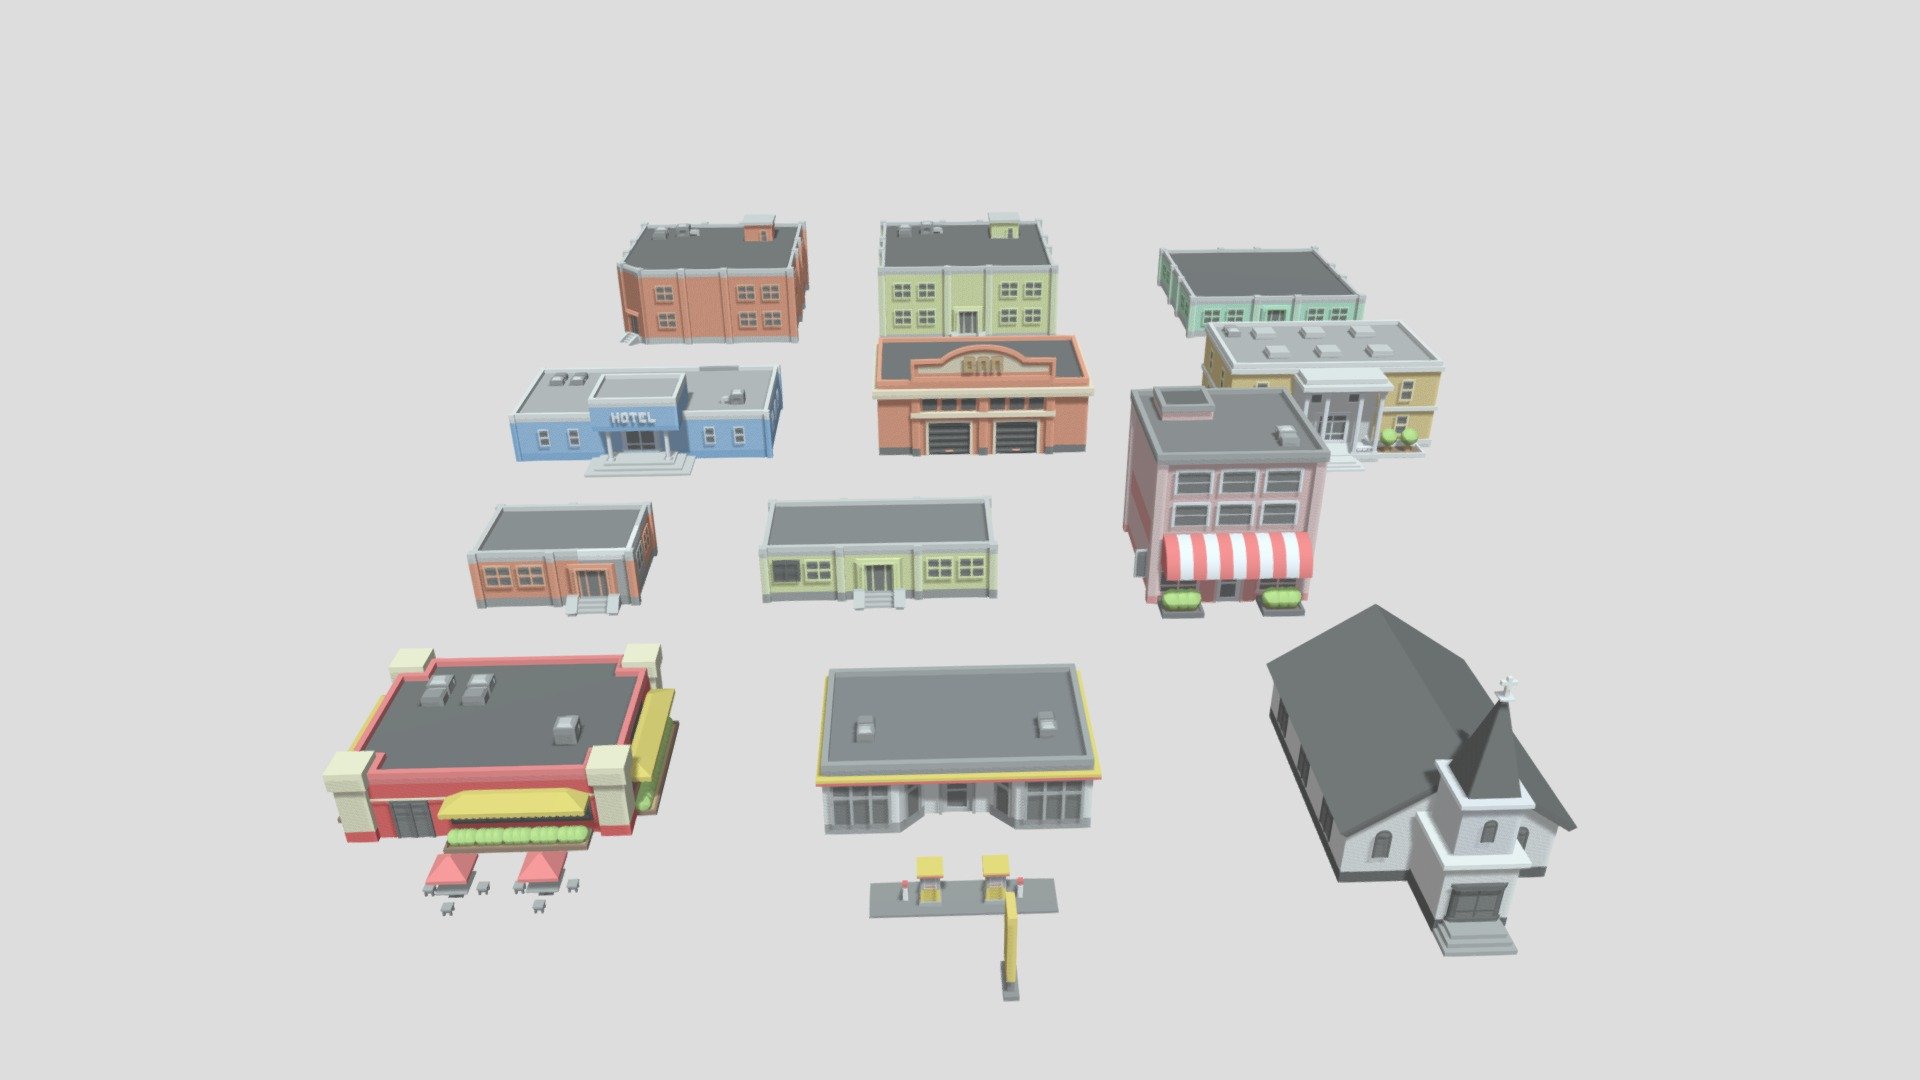 These models are created for game maker using Asset Forge. You may use them in game jam or prototype 3d model